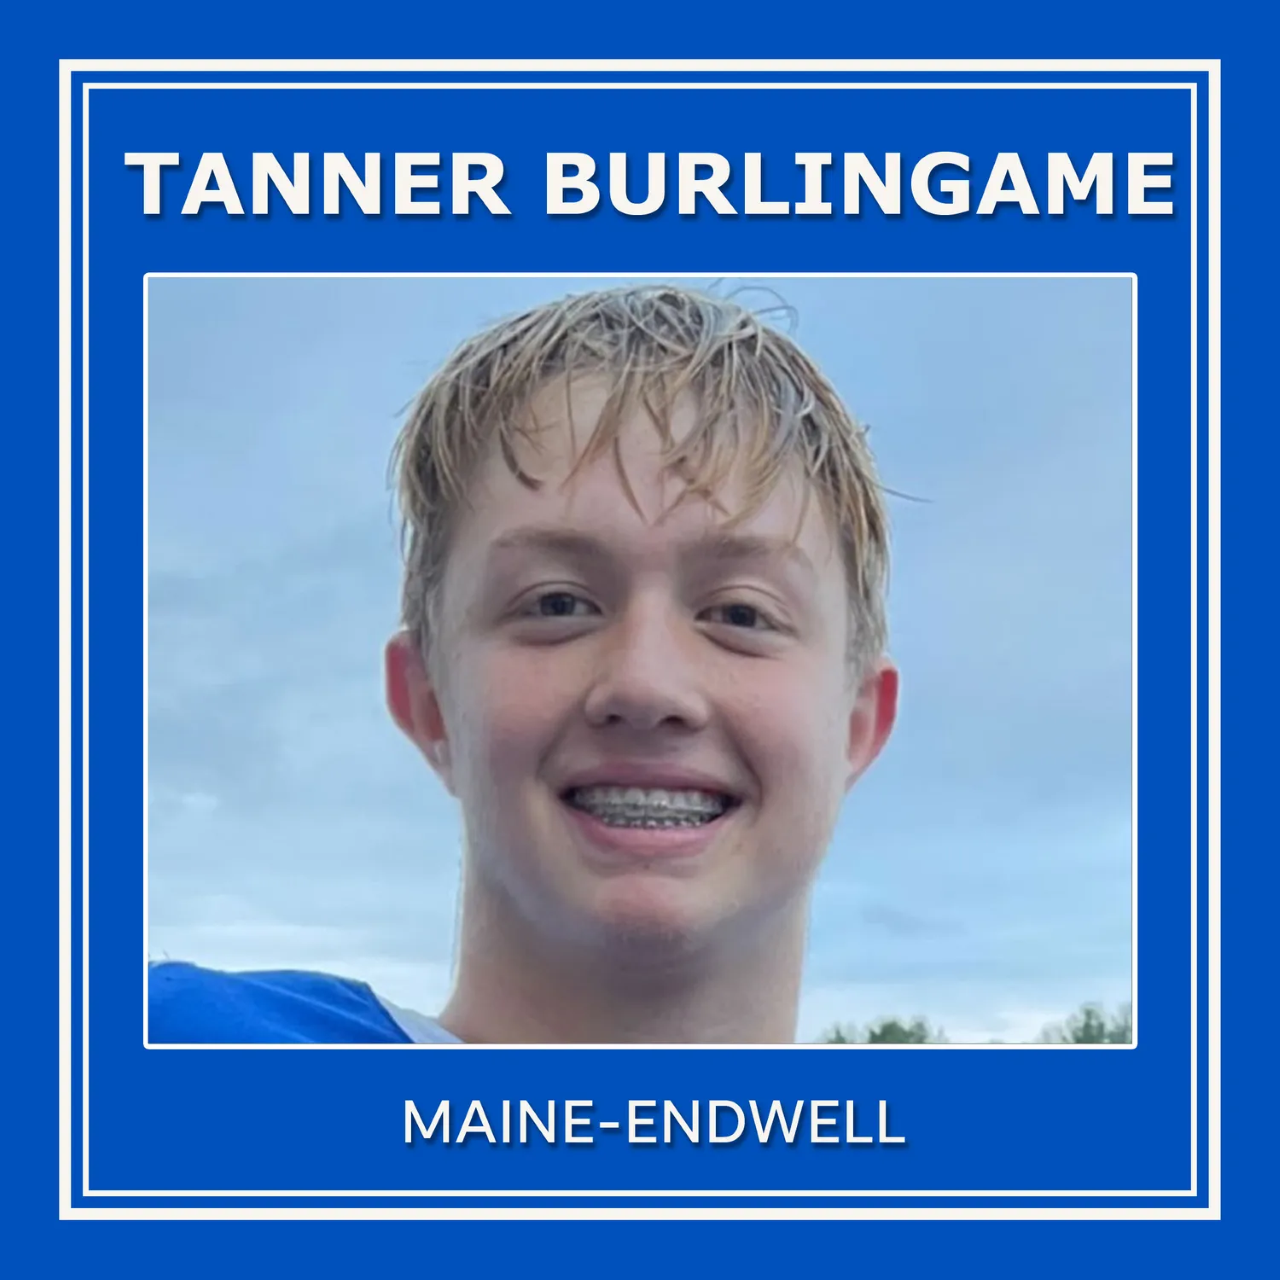 Maine-Endwell Football Player Tanner Burlingame